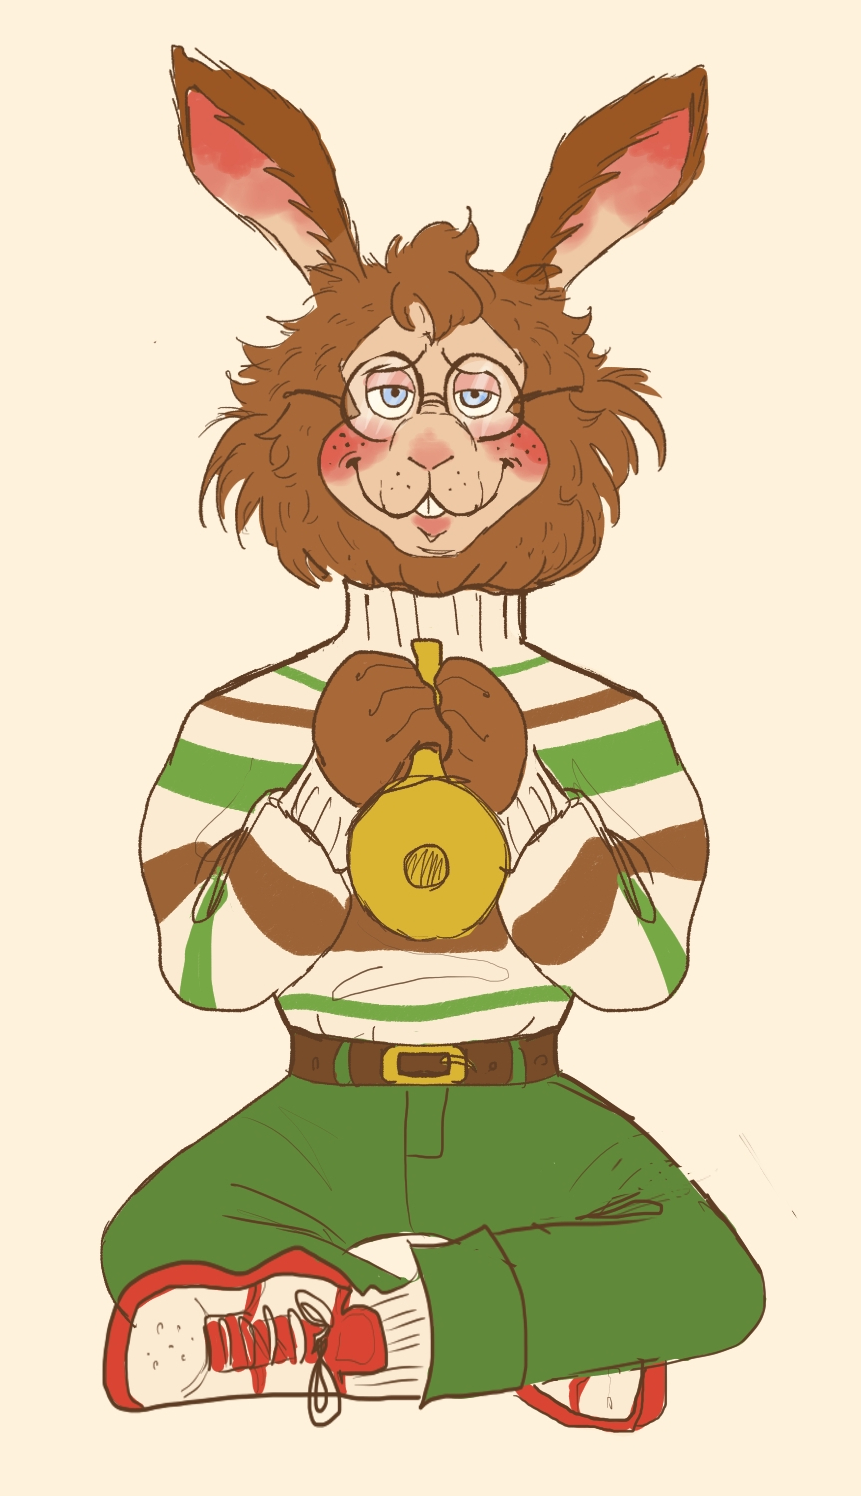 A digital drawing of Ollie Callaghan, a brown lionhead rabbit with a latex animatronic face. He is sitting down and holding a trumpet, and is drawn like a creative engineering animatronic.